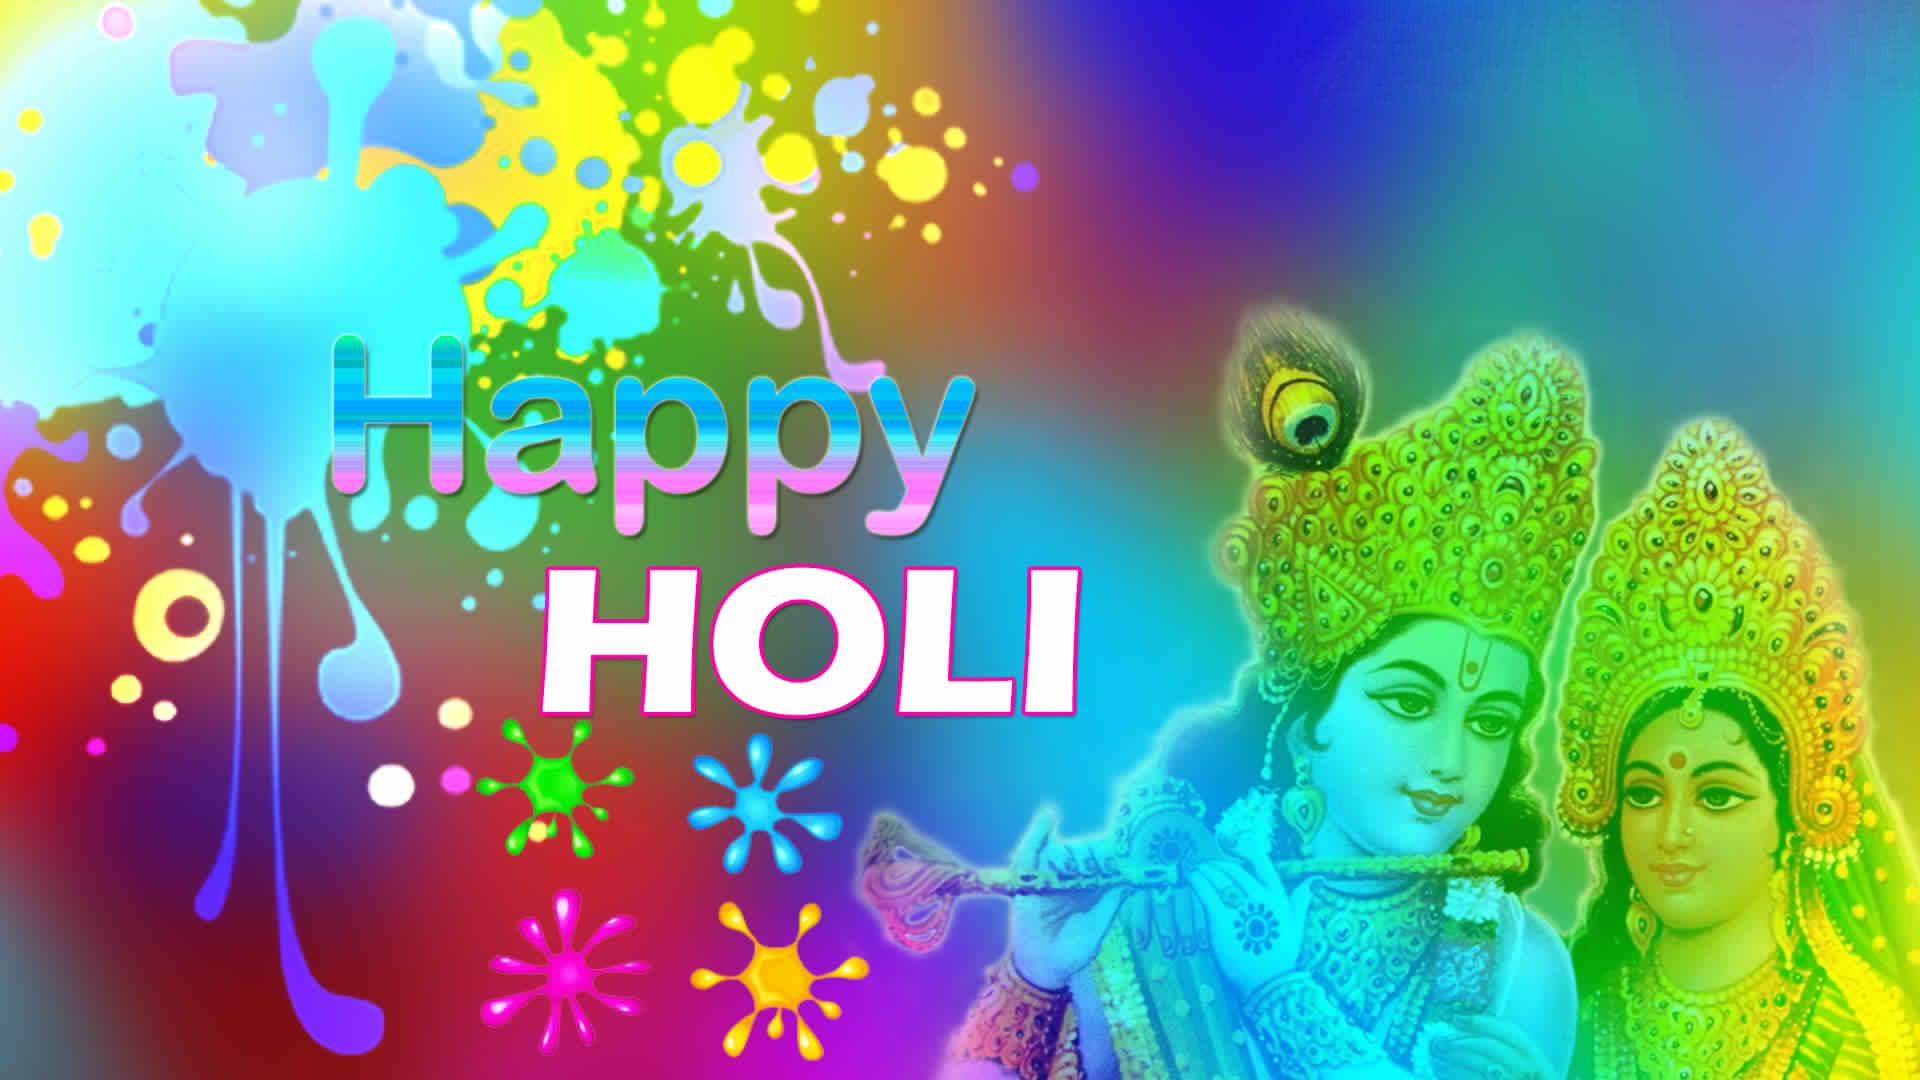 Free Download Images Of Holi